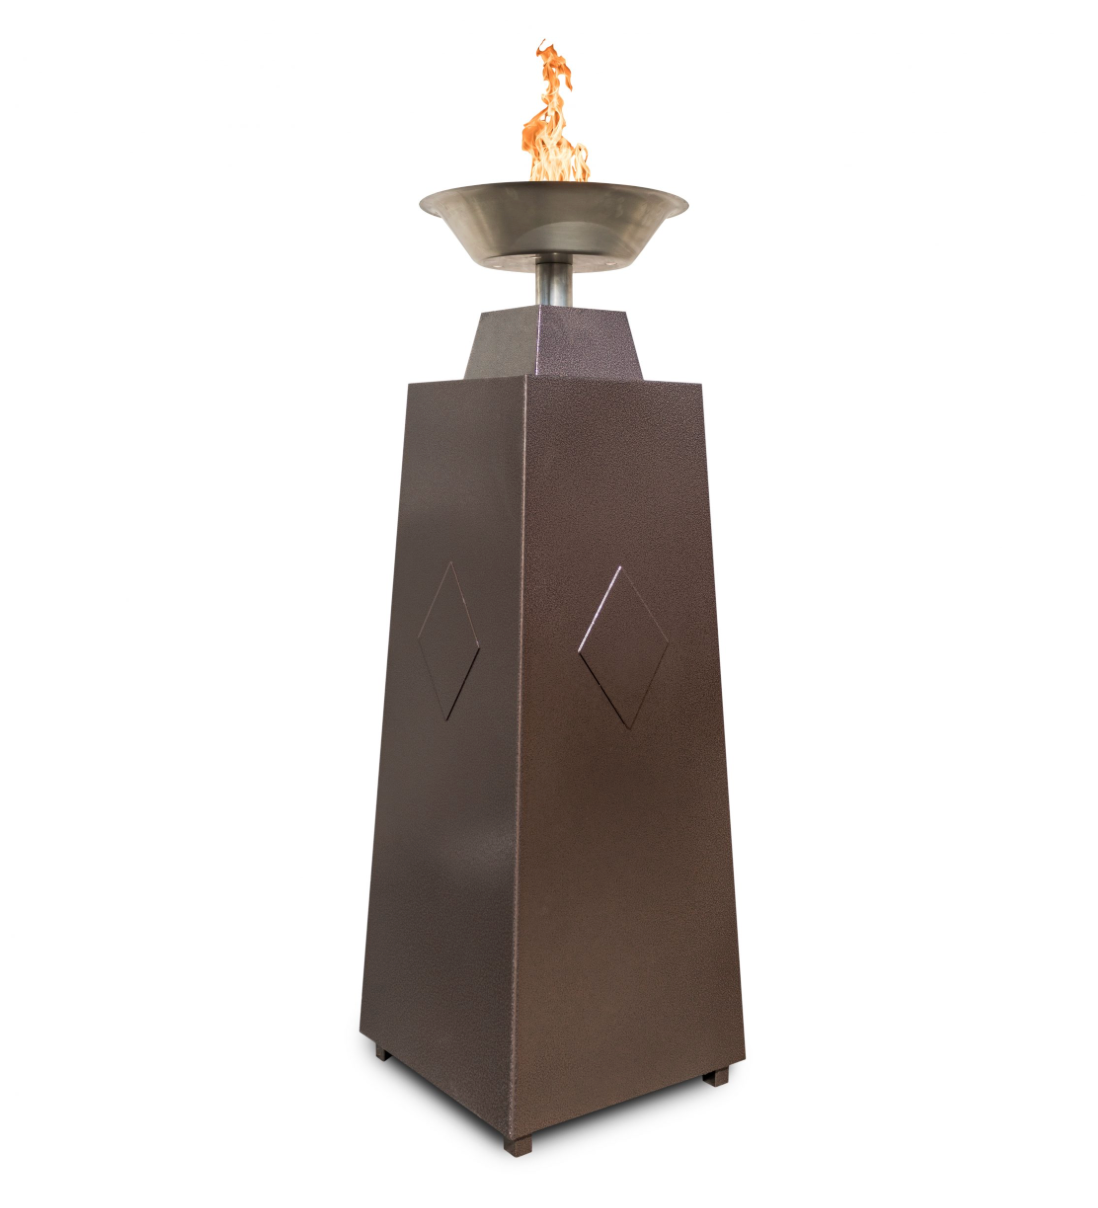 The Outdoor Plus Stainless Steel Granada Fire Tower